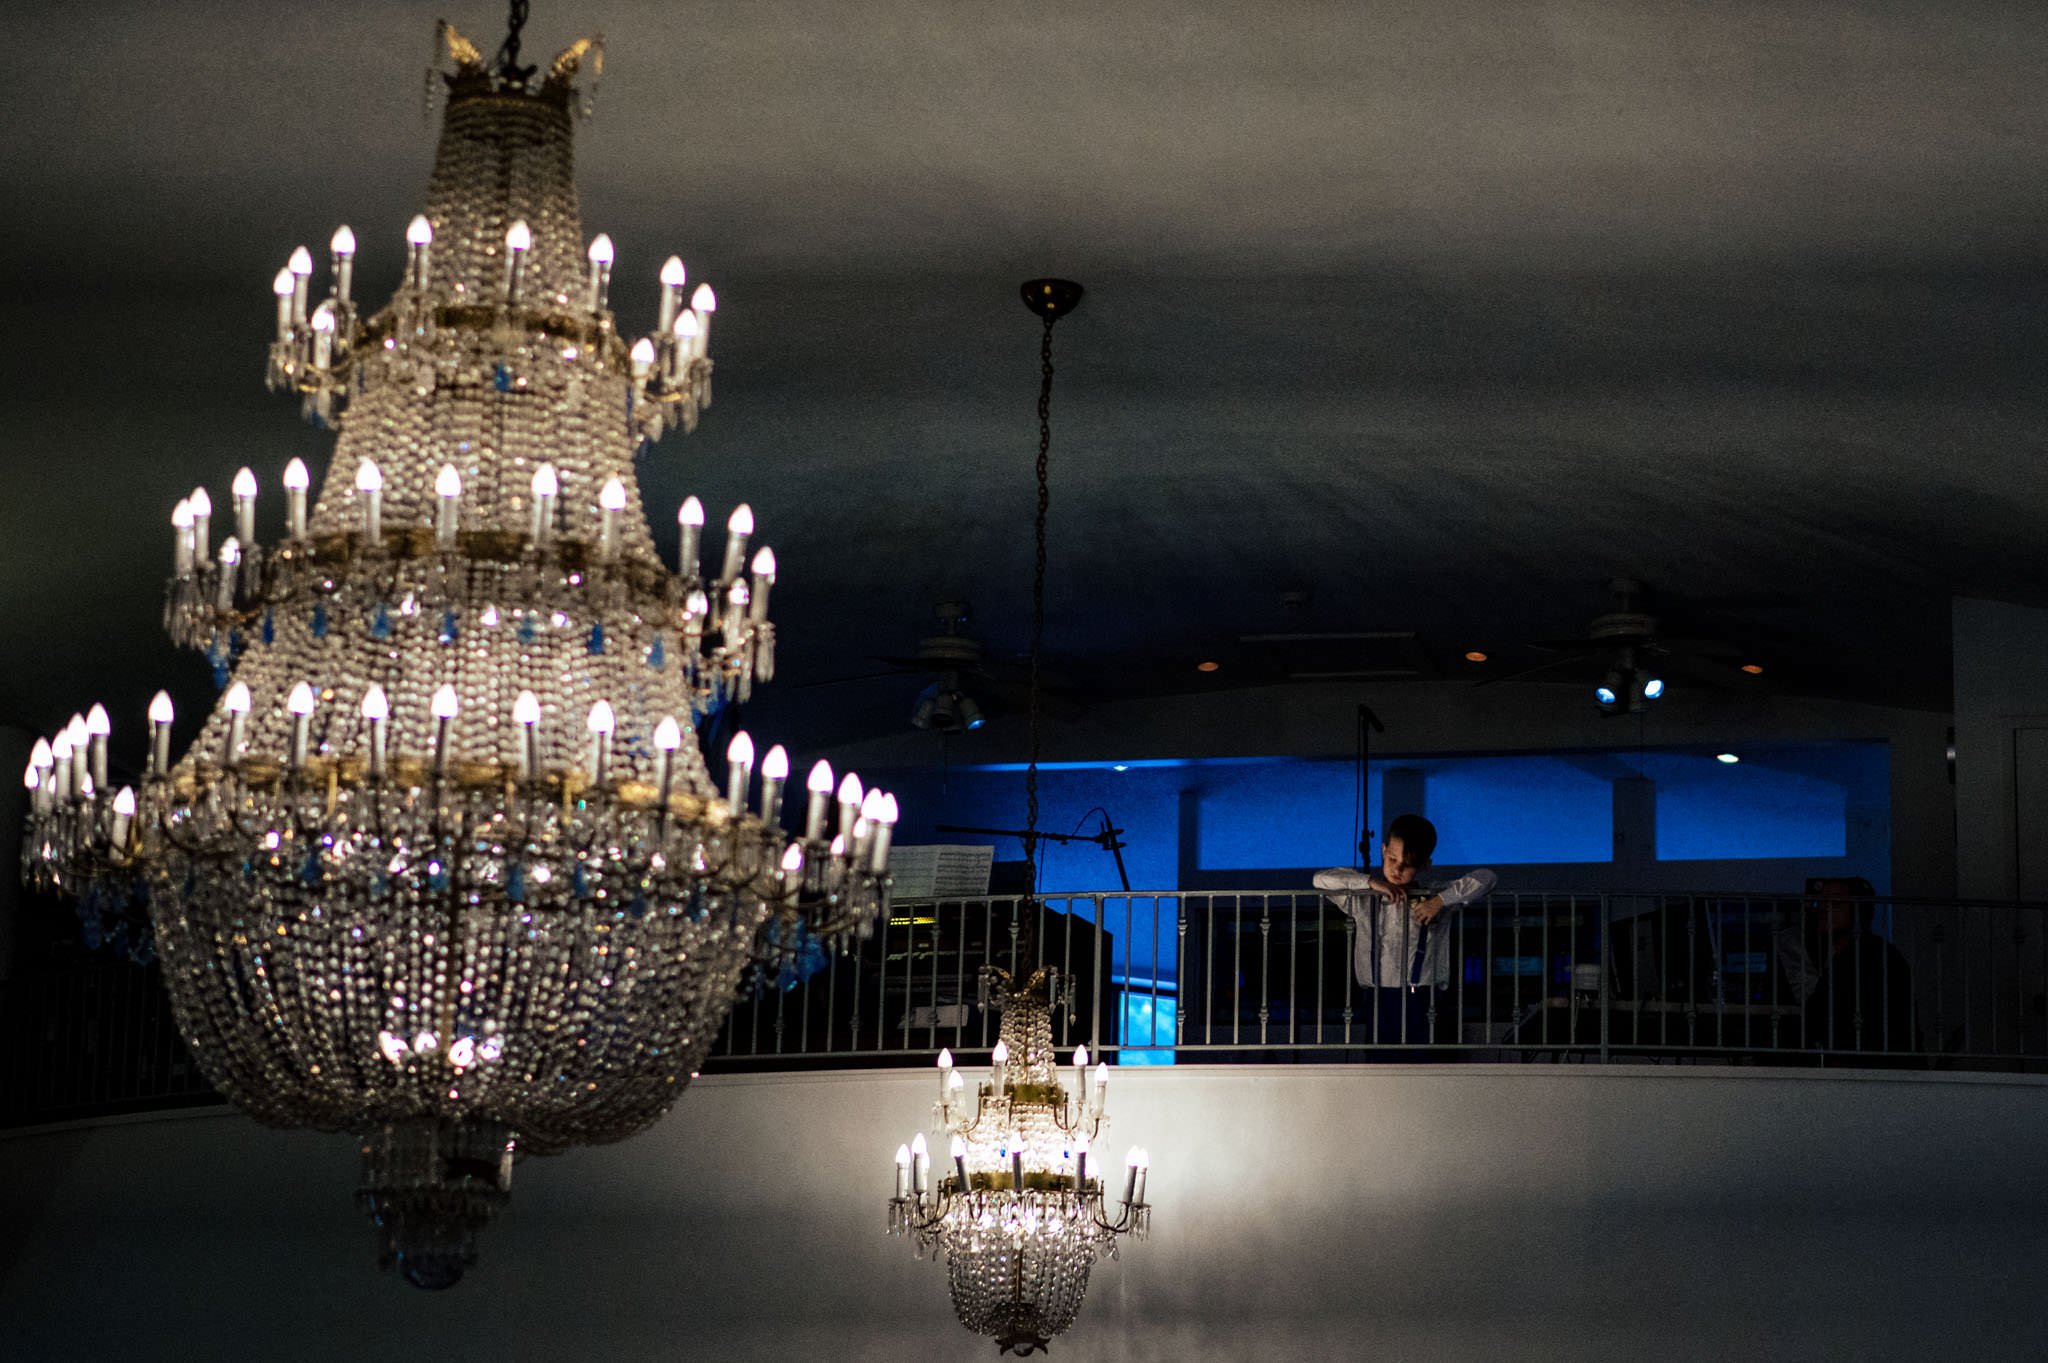 A wedding photographer captures a man standing in a room with a chandelier.